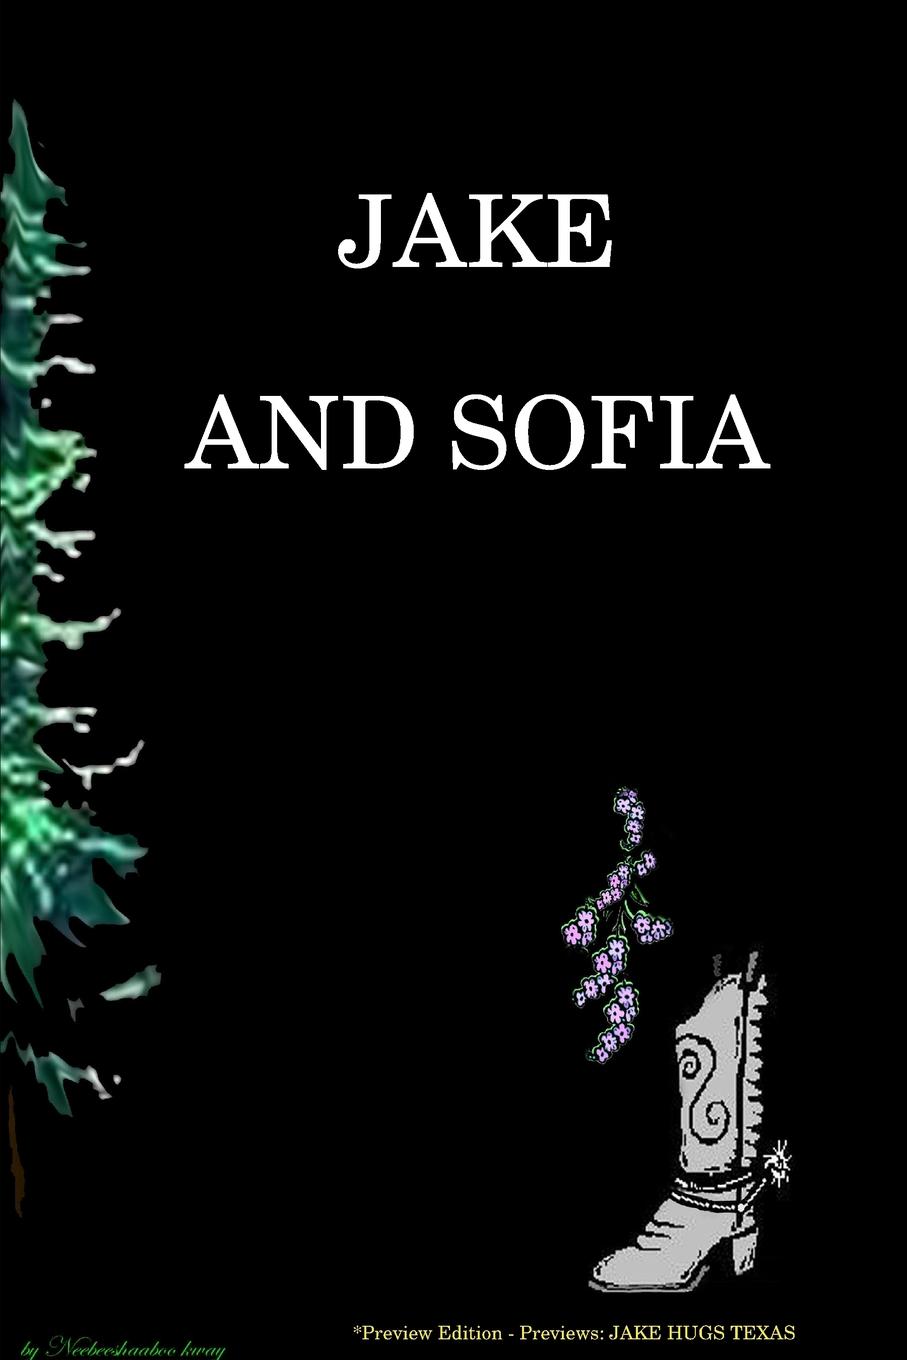 Neebeeshaabookway (L.G) JAKE AND SOFIA Soft cover - preview edtion